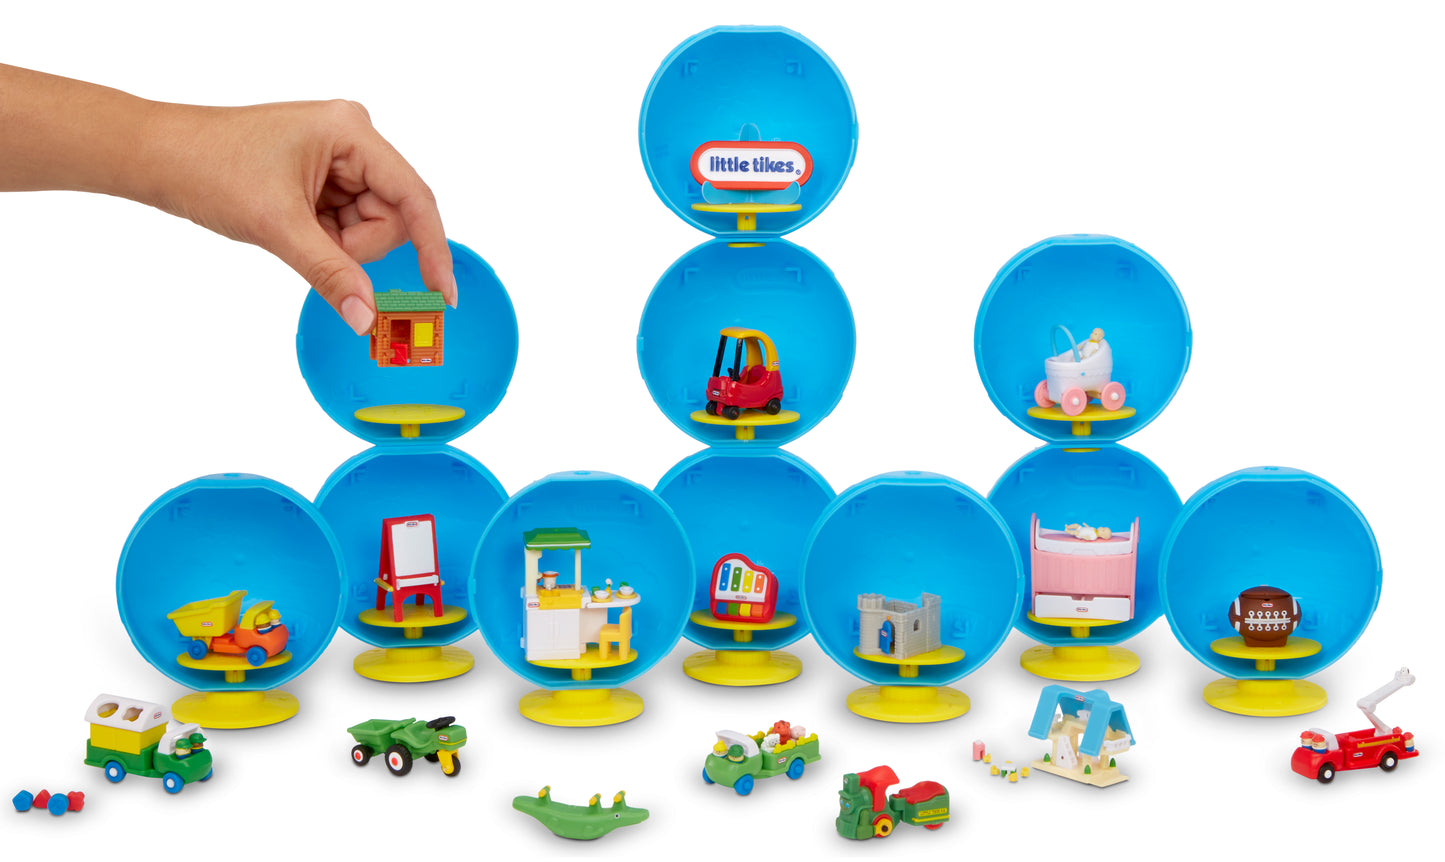 MGA's Miniverse - Little Tikes Minis in PDQ Series 3A